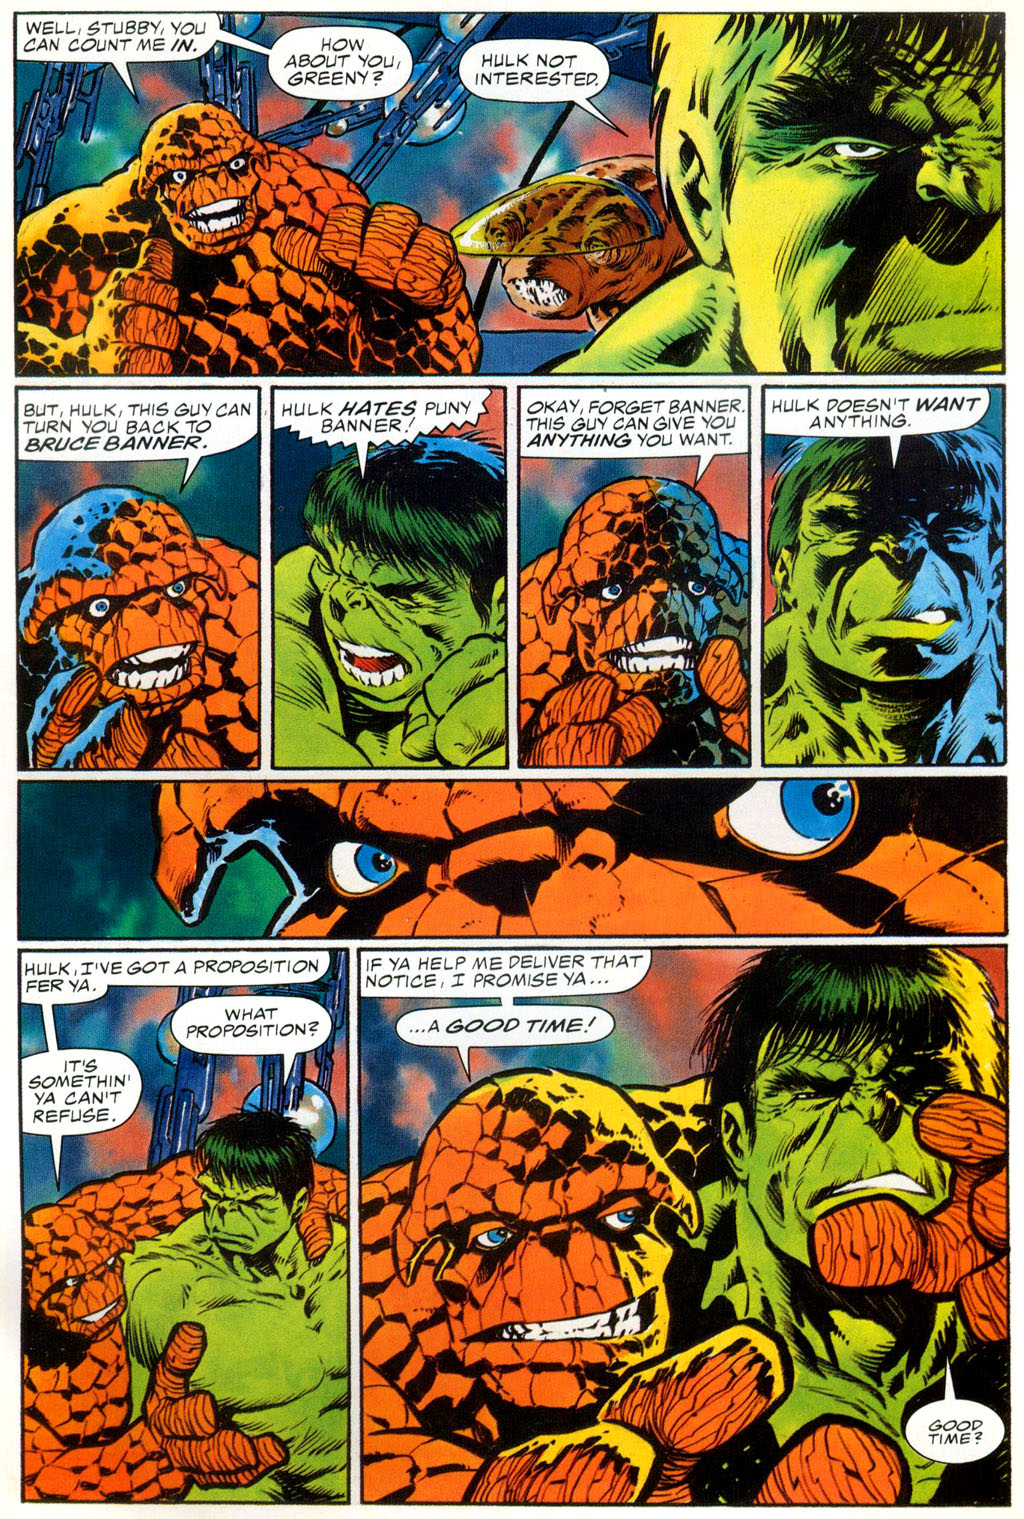 Read online Marvel Graphic Novel comic -  Issue #29 - Hulk & Thing - The Big Change - 20